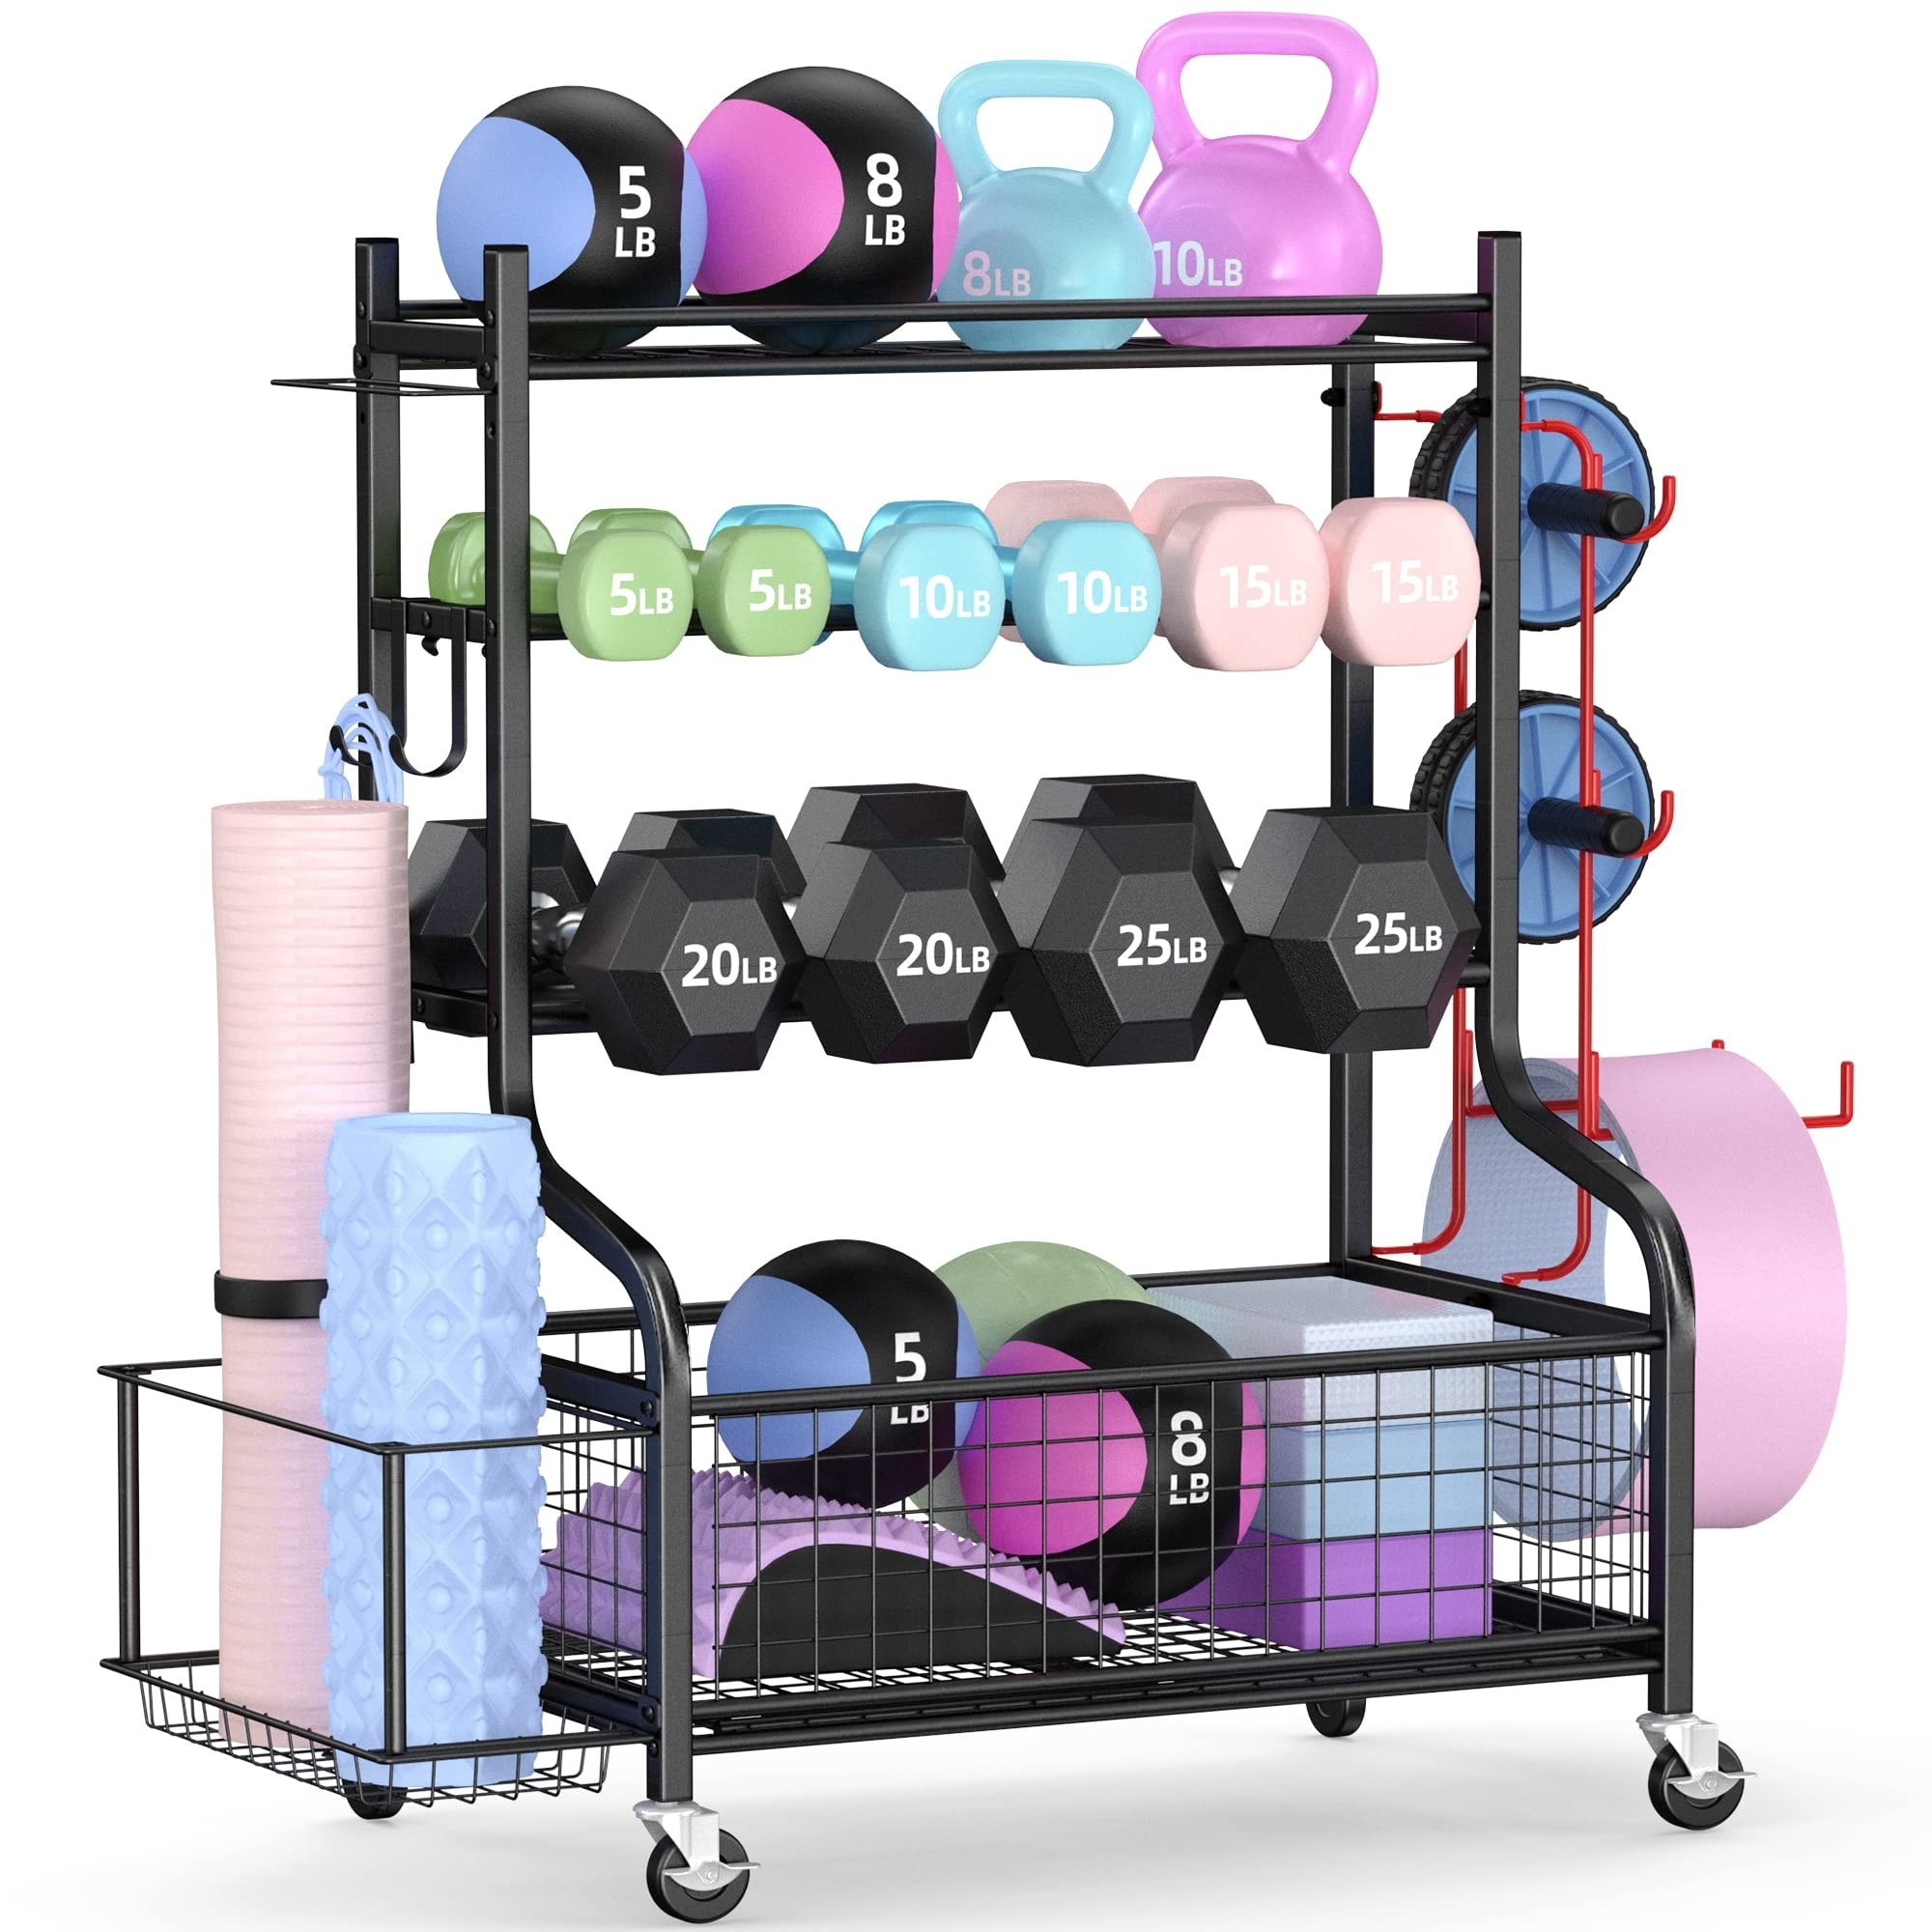 https://ak1.ostkcdn.com/images/products/is/images/direct/e515954ce6f7b723ad970019dbaebb9e896d6022/Dumbbell-Rack%2C-Weight-Rack-for-Dumbbells%2C-Home-Gym-Storage-for-Dumbbells-Kettlebells-Yoga-Mat-and-Balls.jpg